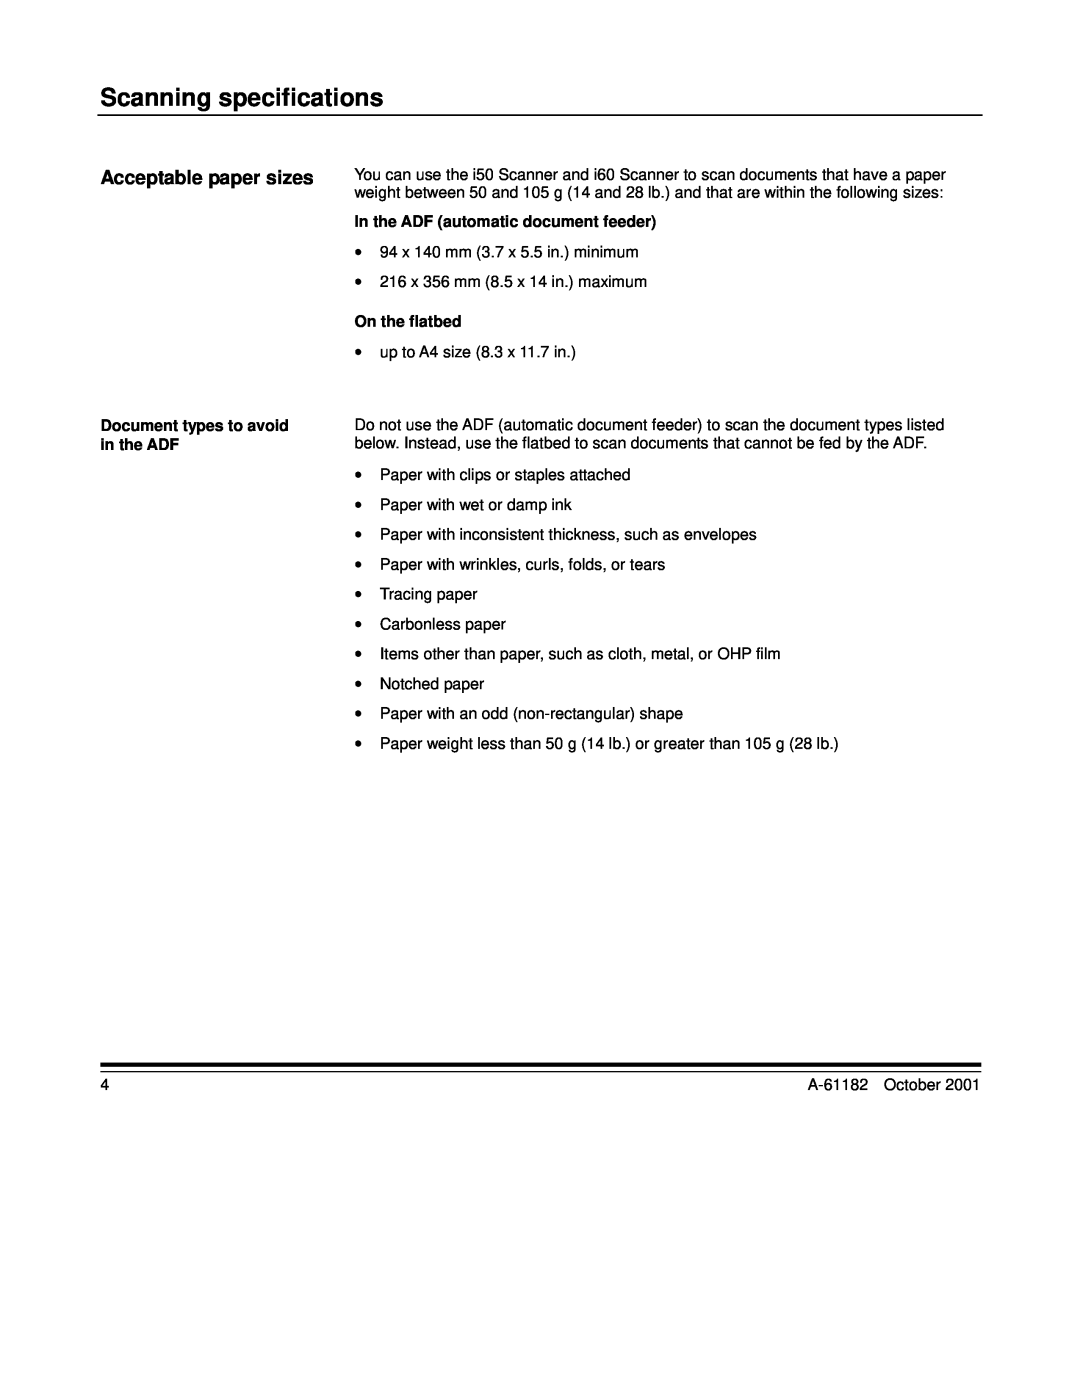 Kodak i50, i60 manual Scanning specifications, Acceptable paper sizes 